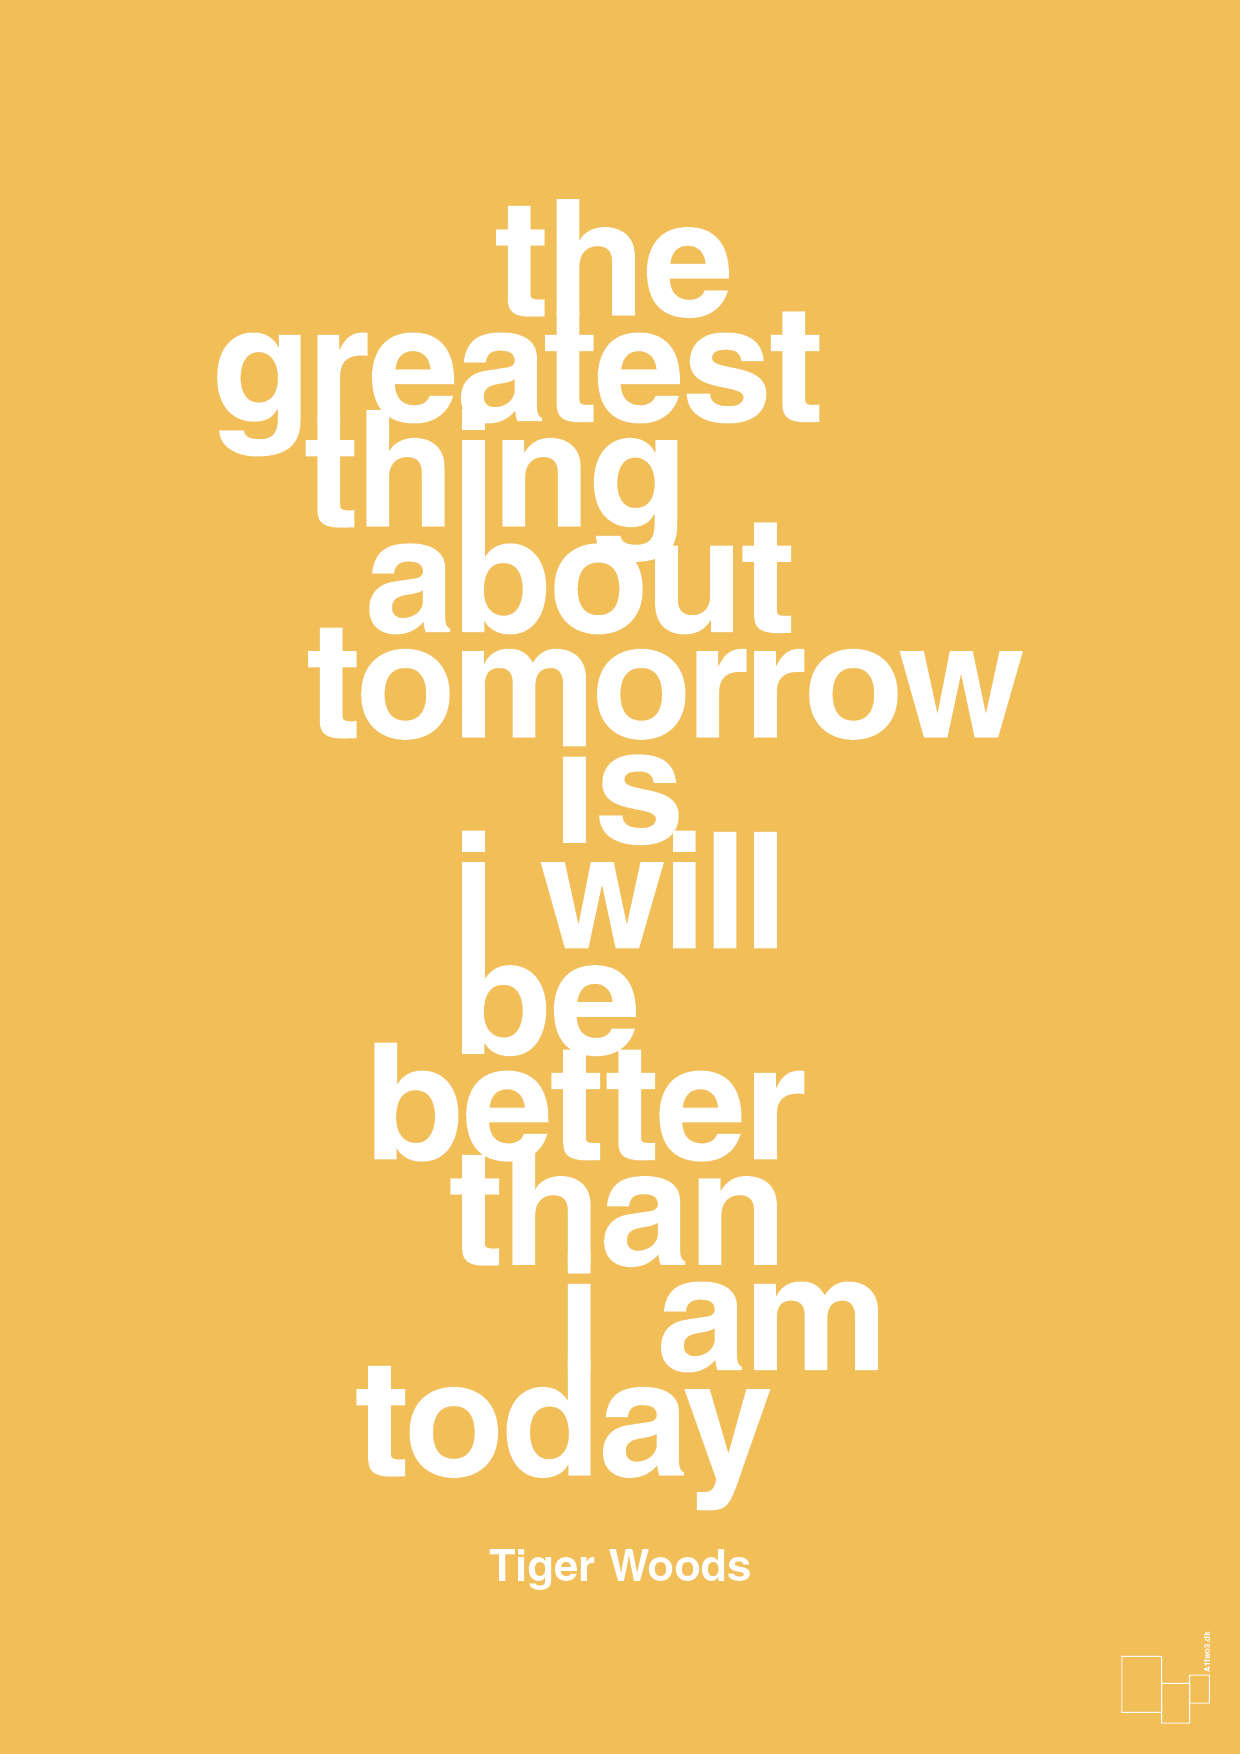 the greatest thing about tomorrow is i will be better than i am today - Plakat med Citater i Honeycomb